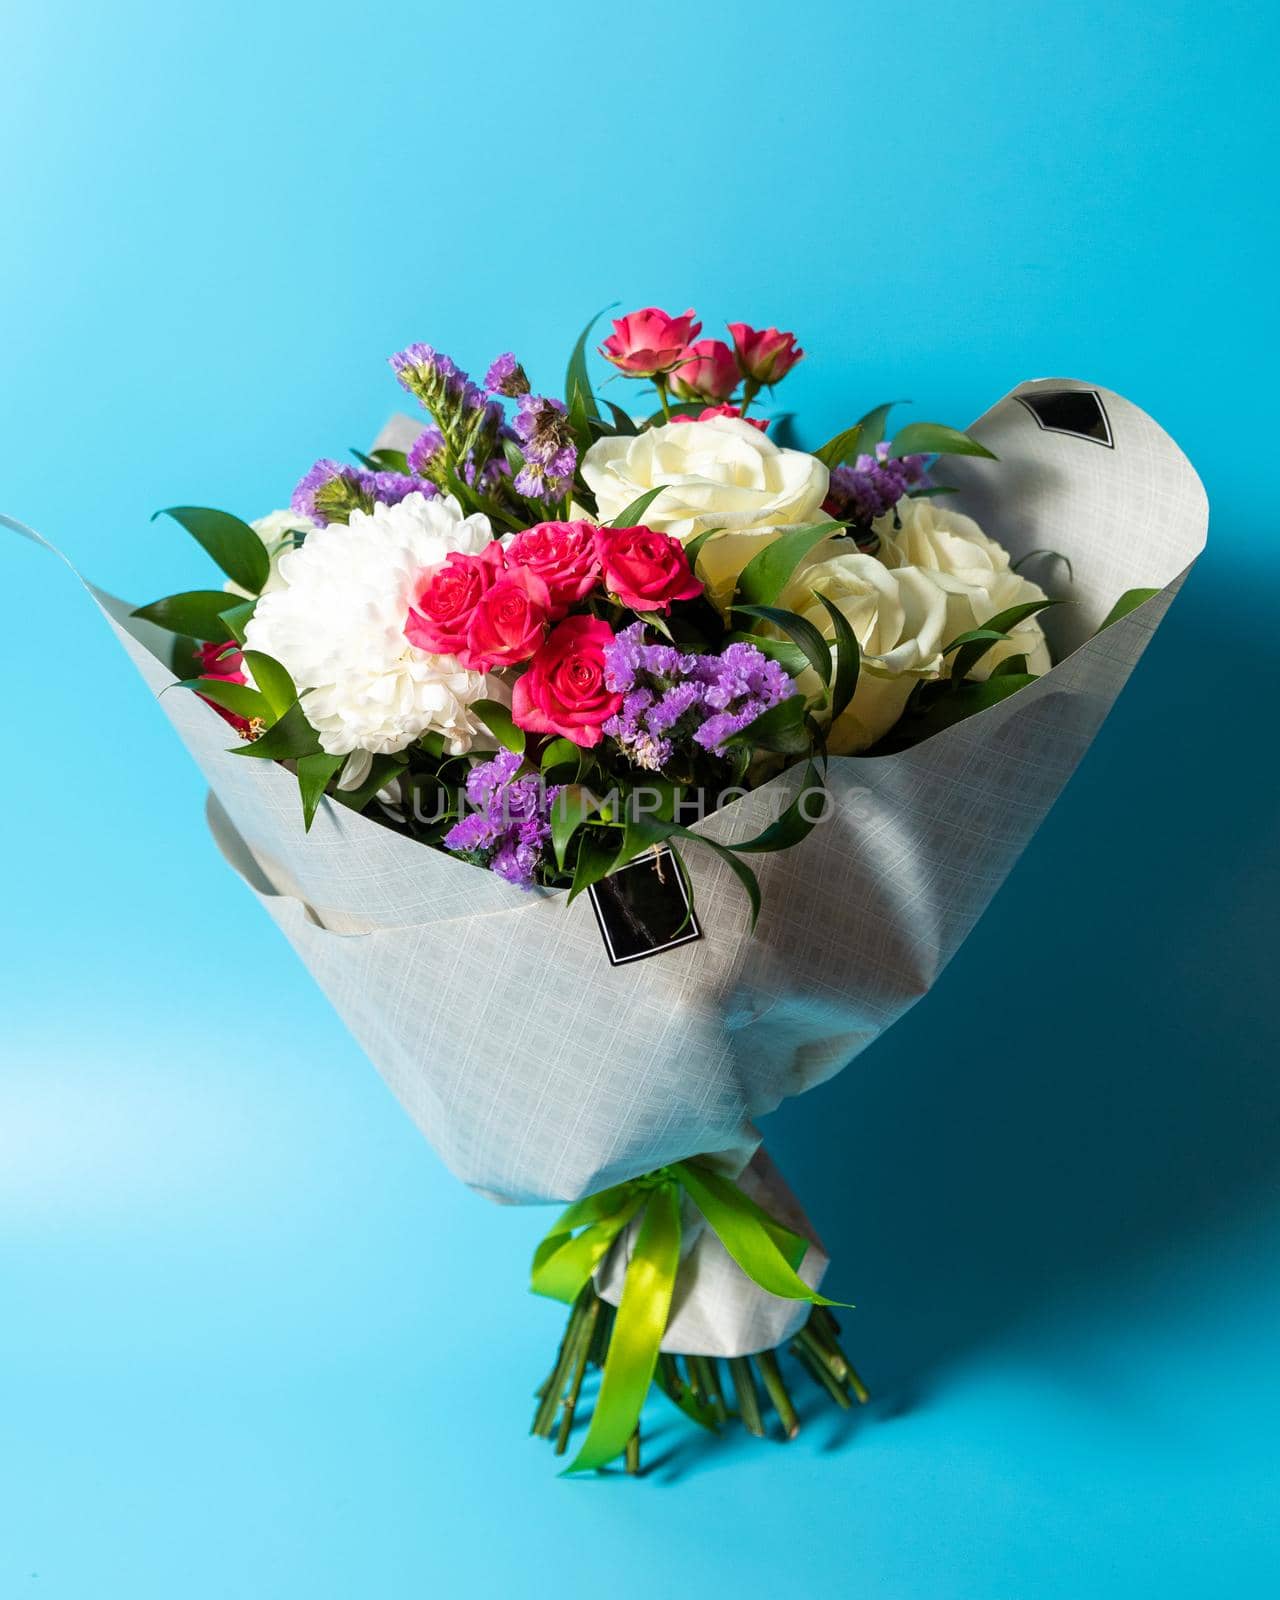 Flower bouquet with blue background